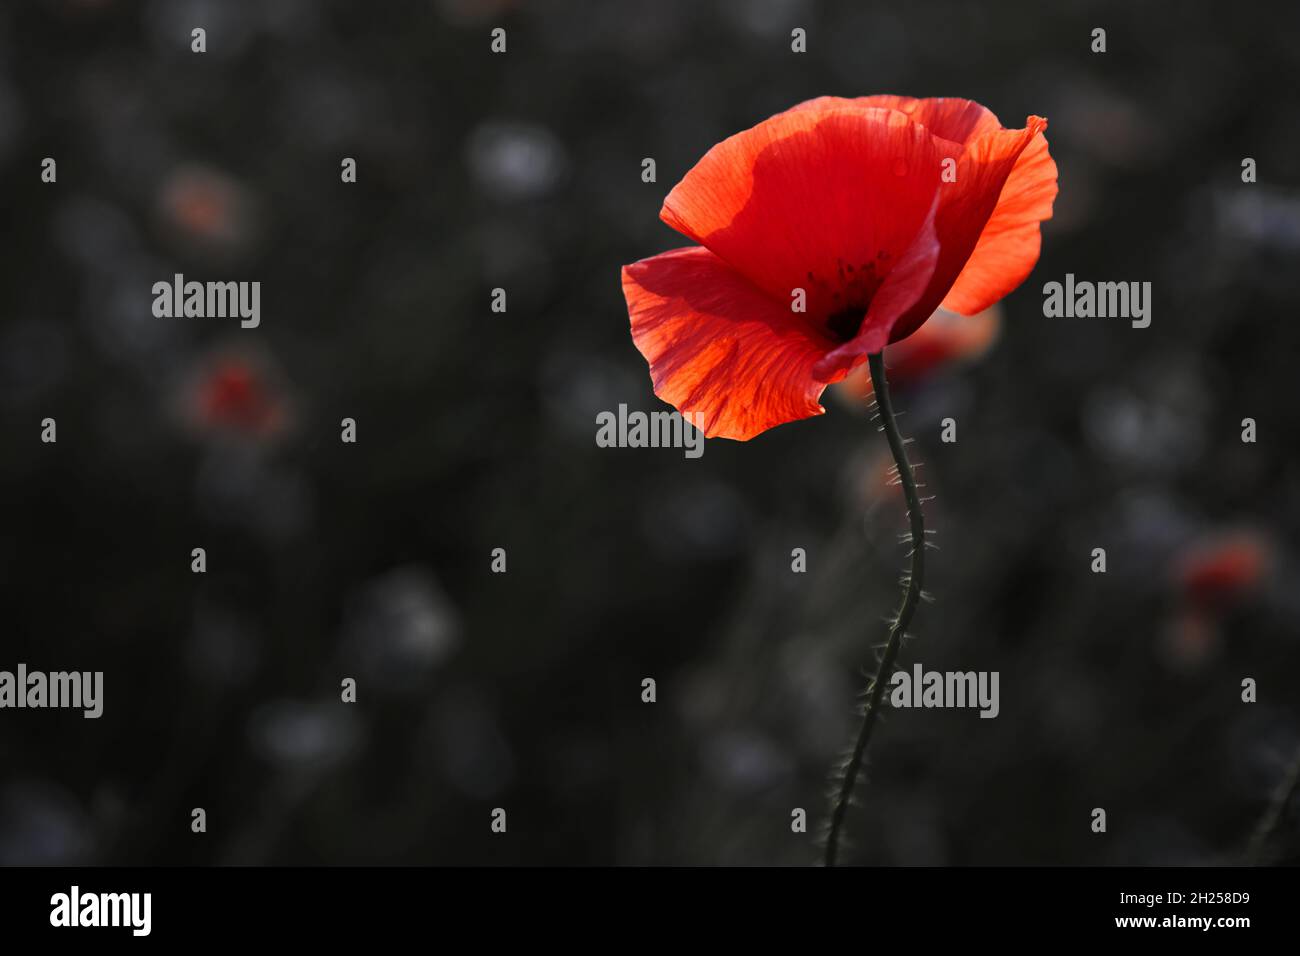 Remembrance day poppy. Red poppies in a poppies field with desaturated background Stock Photo